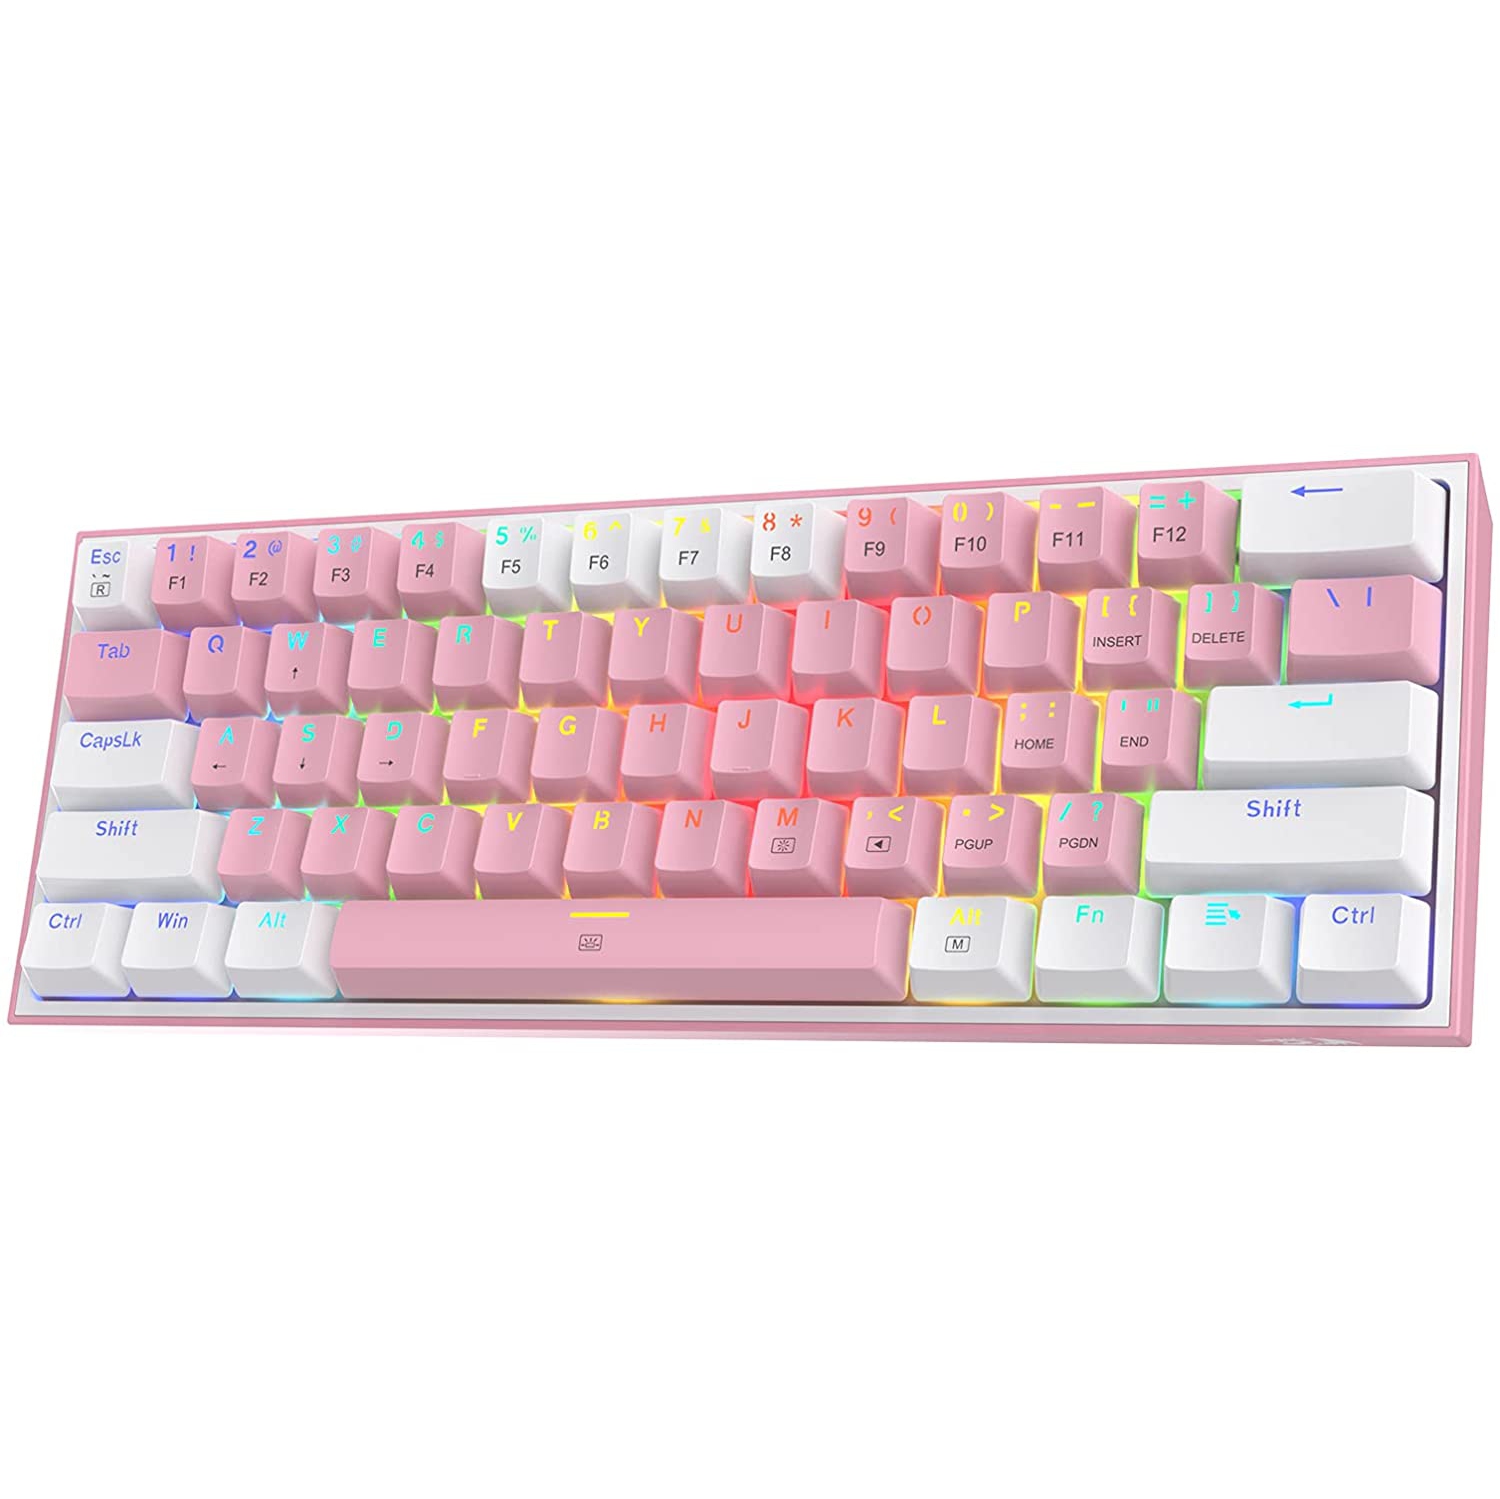 Redragon K617 60% Wired RGB Gaming Keyboard, 61 Keys Compact Mechanical Keyboard w/White & Pink Mixed-Colored Keycaps, Linear Red Switch, Pro Driver Support